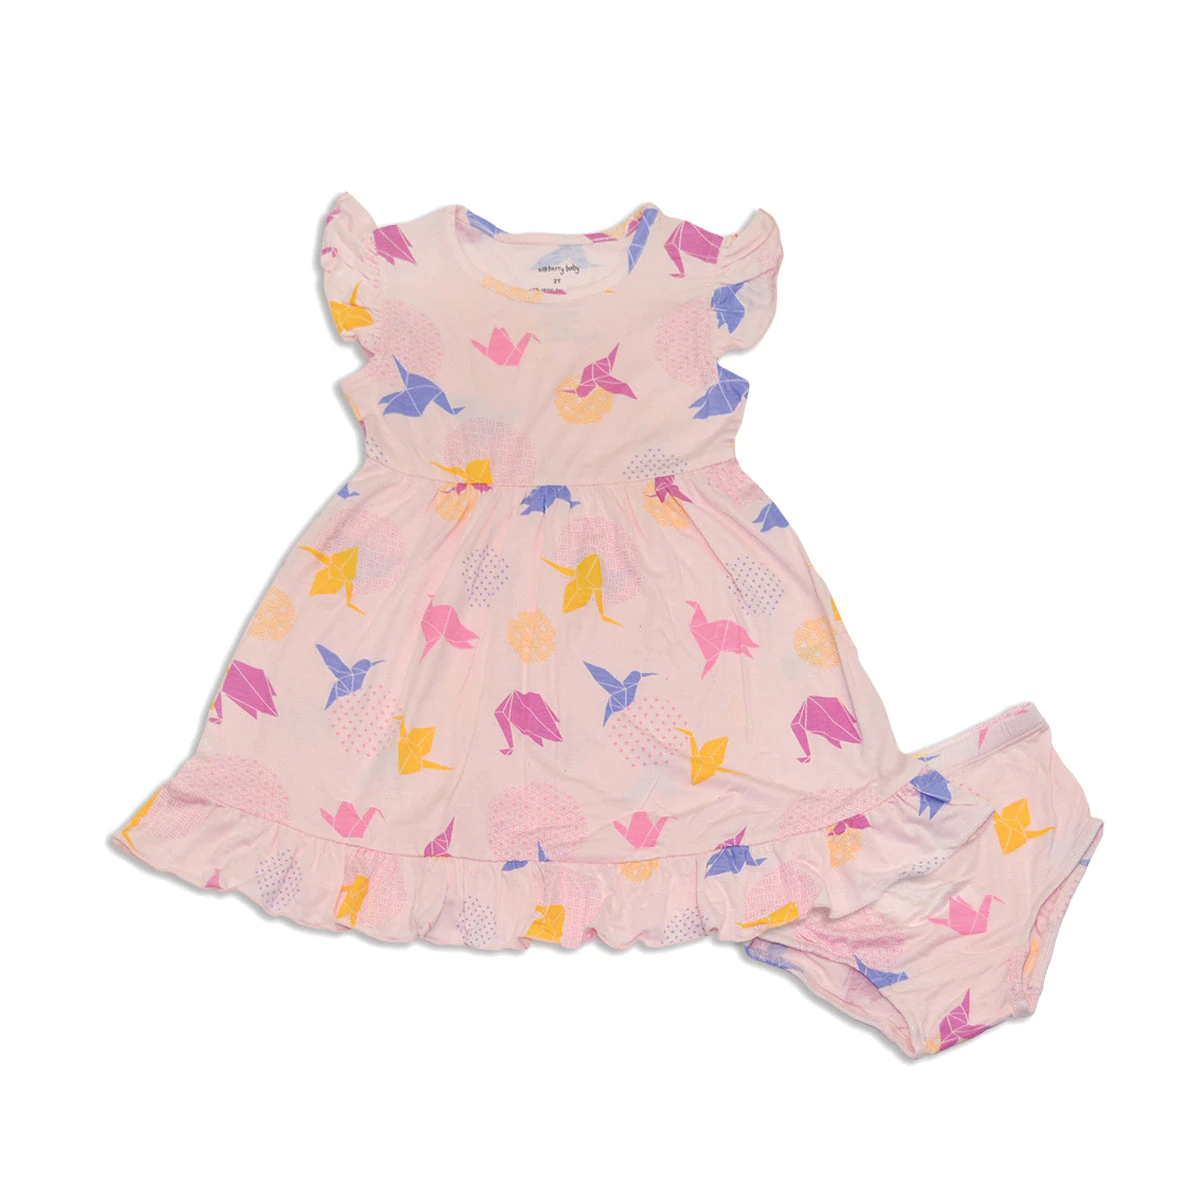 Silkberry baby bamboo ruffle dress with bloomer - origami print